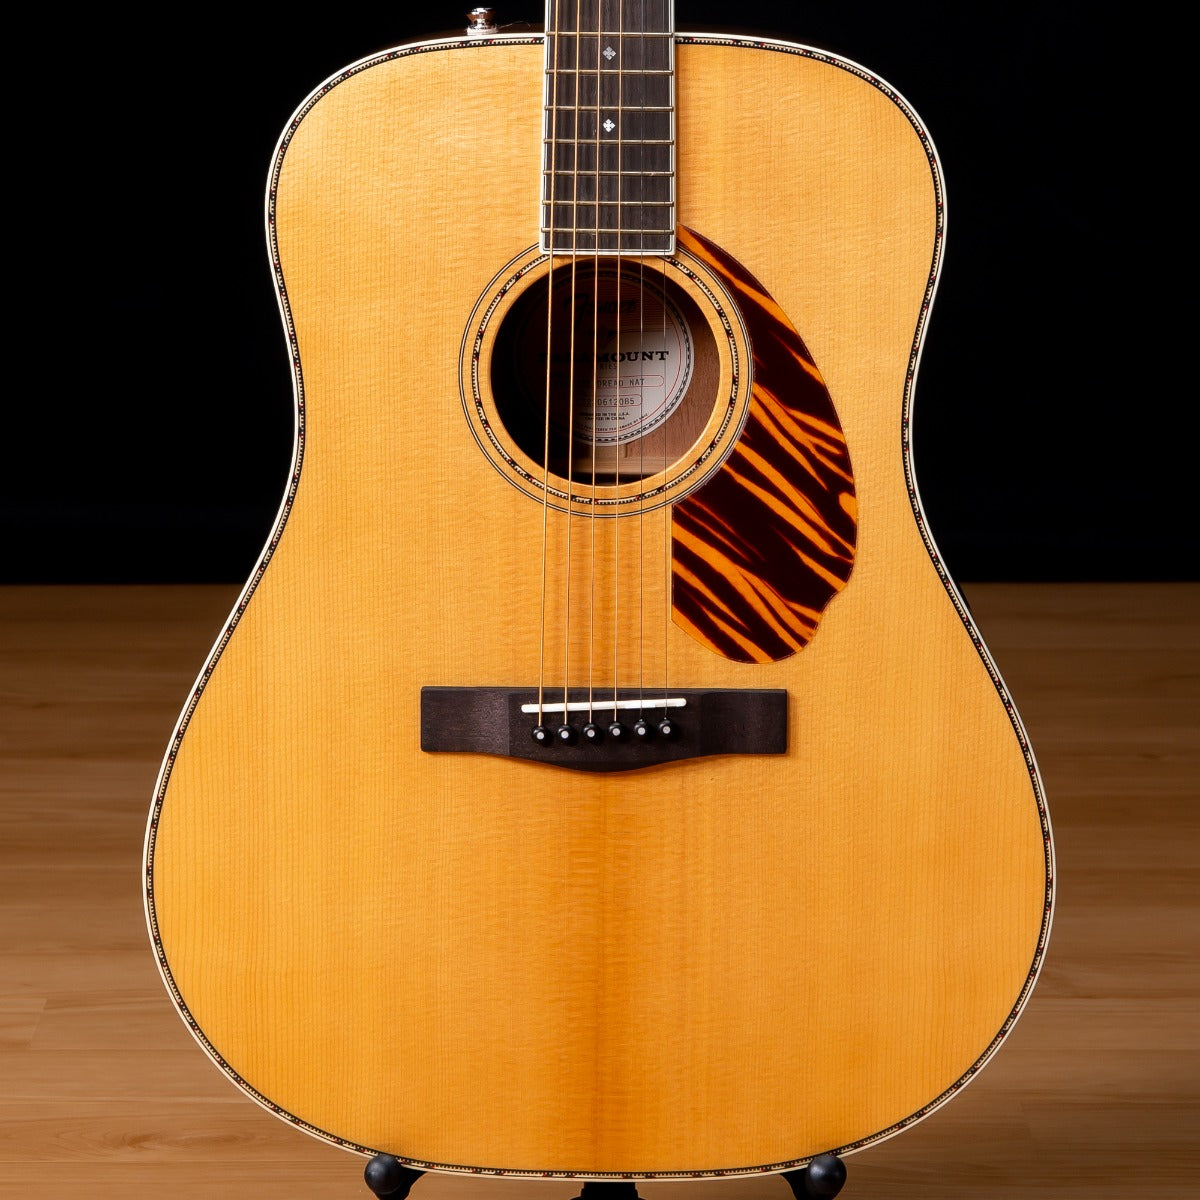 Fender Paramount PD-220E Dreadnought Acoustic-Electric Guitar - Ovangkol, Natural view 1